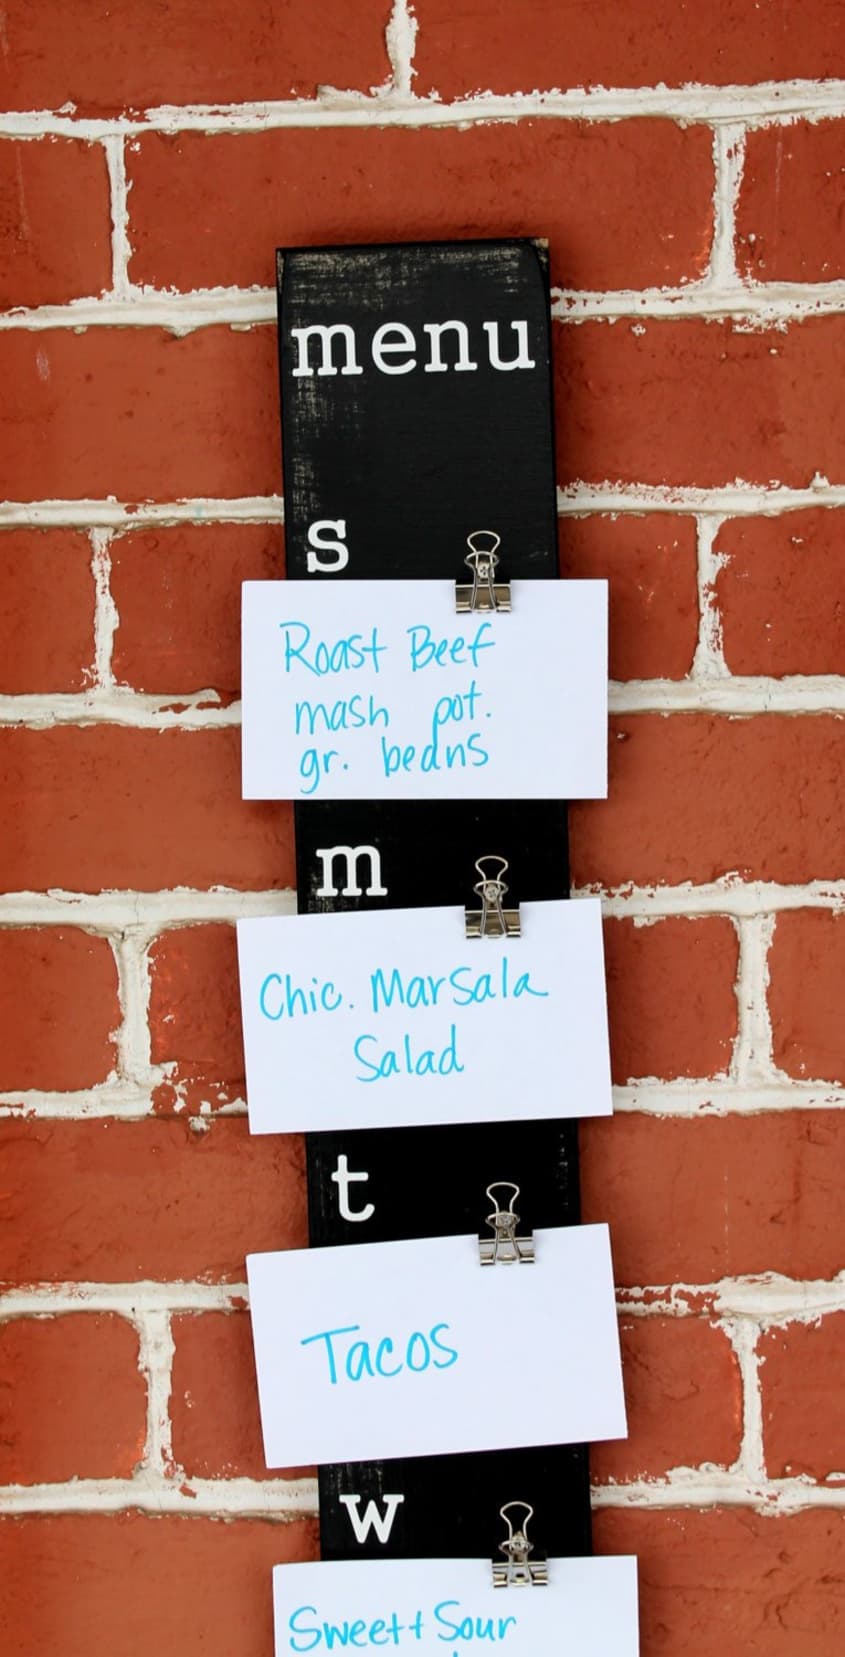 Menu Board Ideas So Your Family Knows What's For Dinner